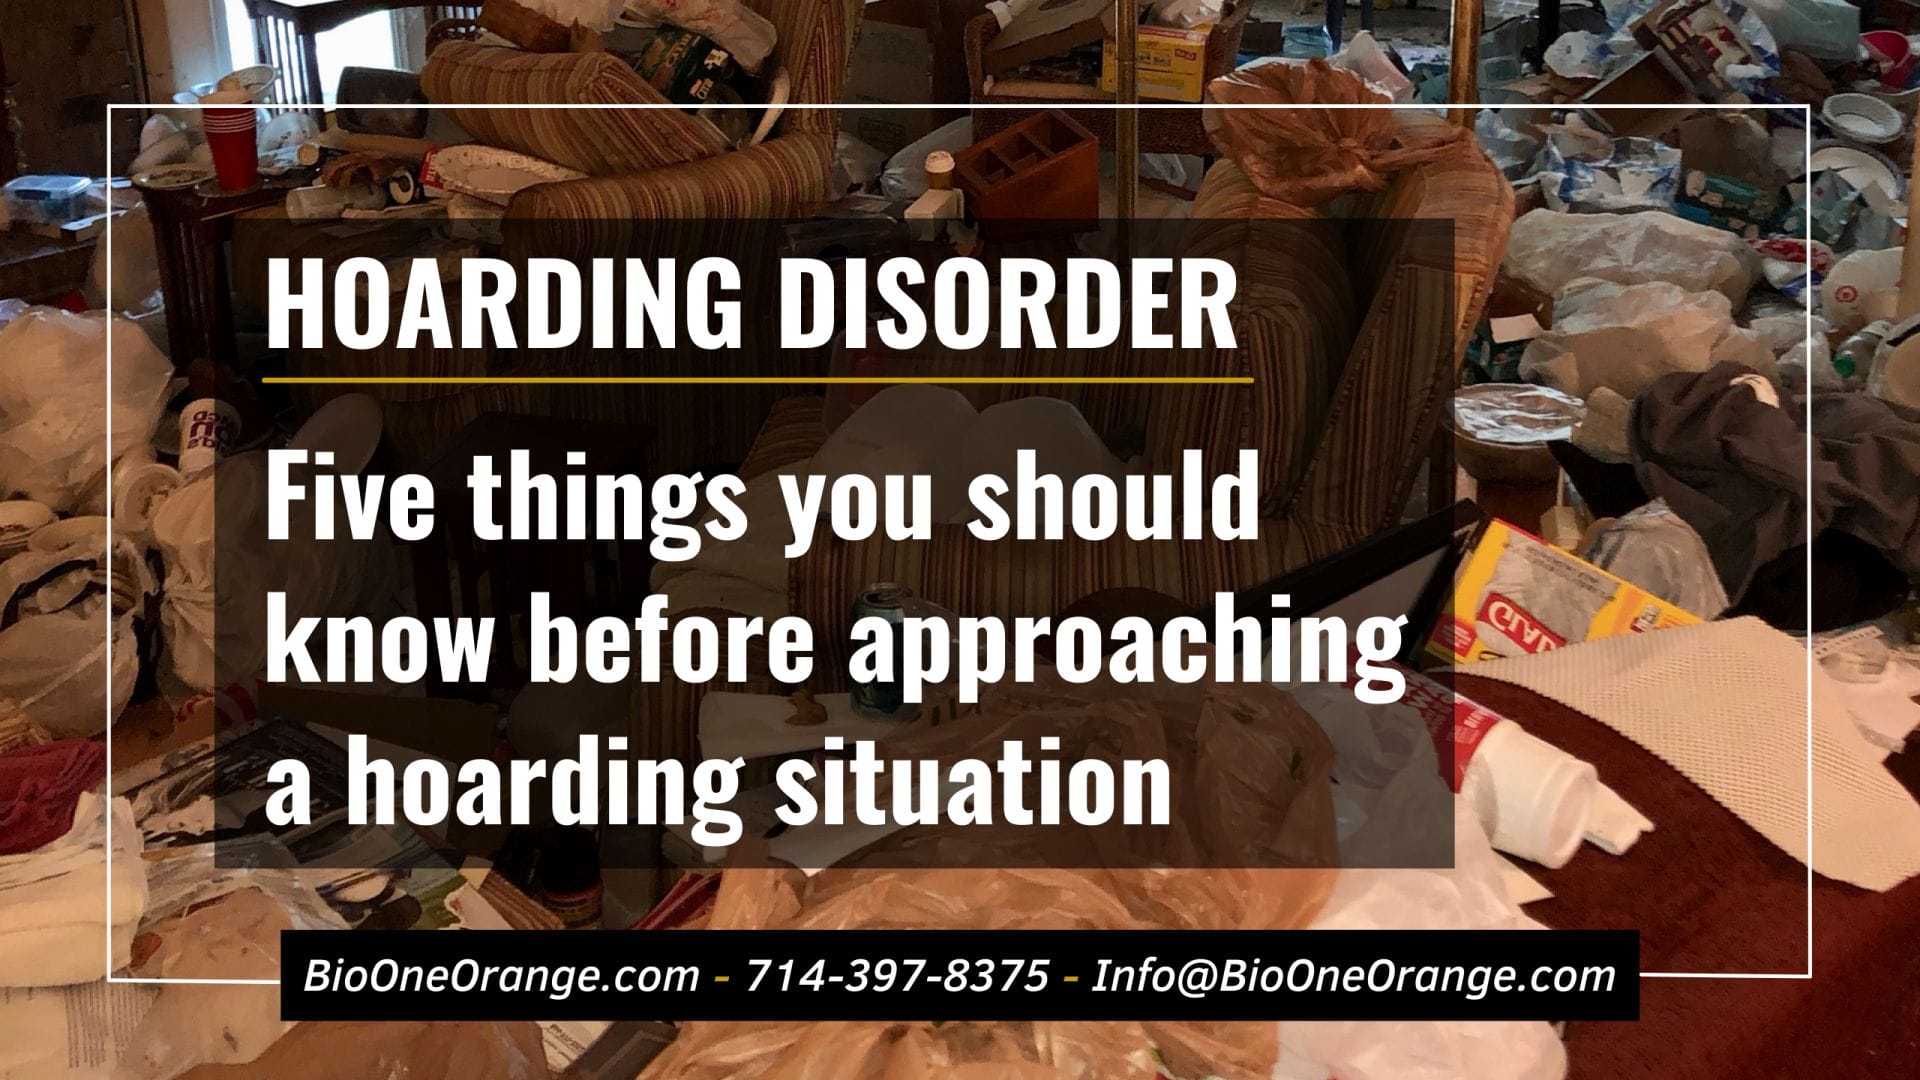 Hoarding disorder - Five things you should know before approaching a hoarding situation